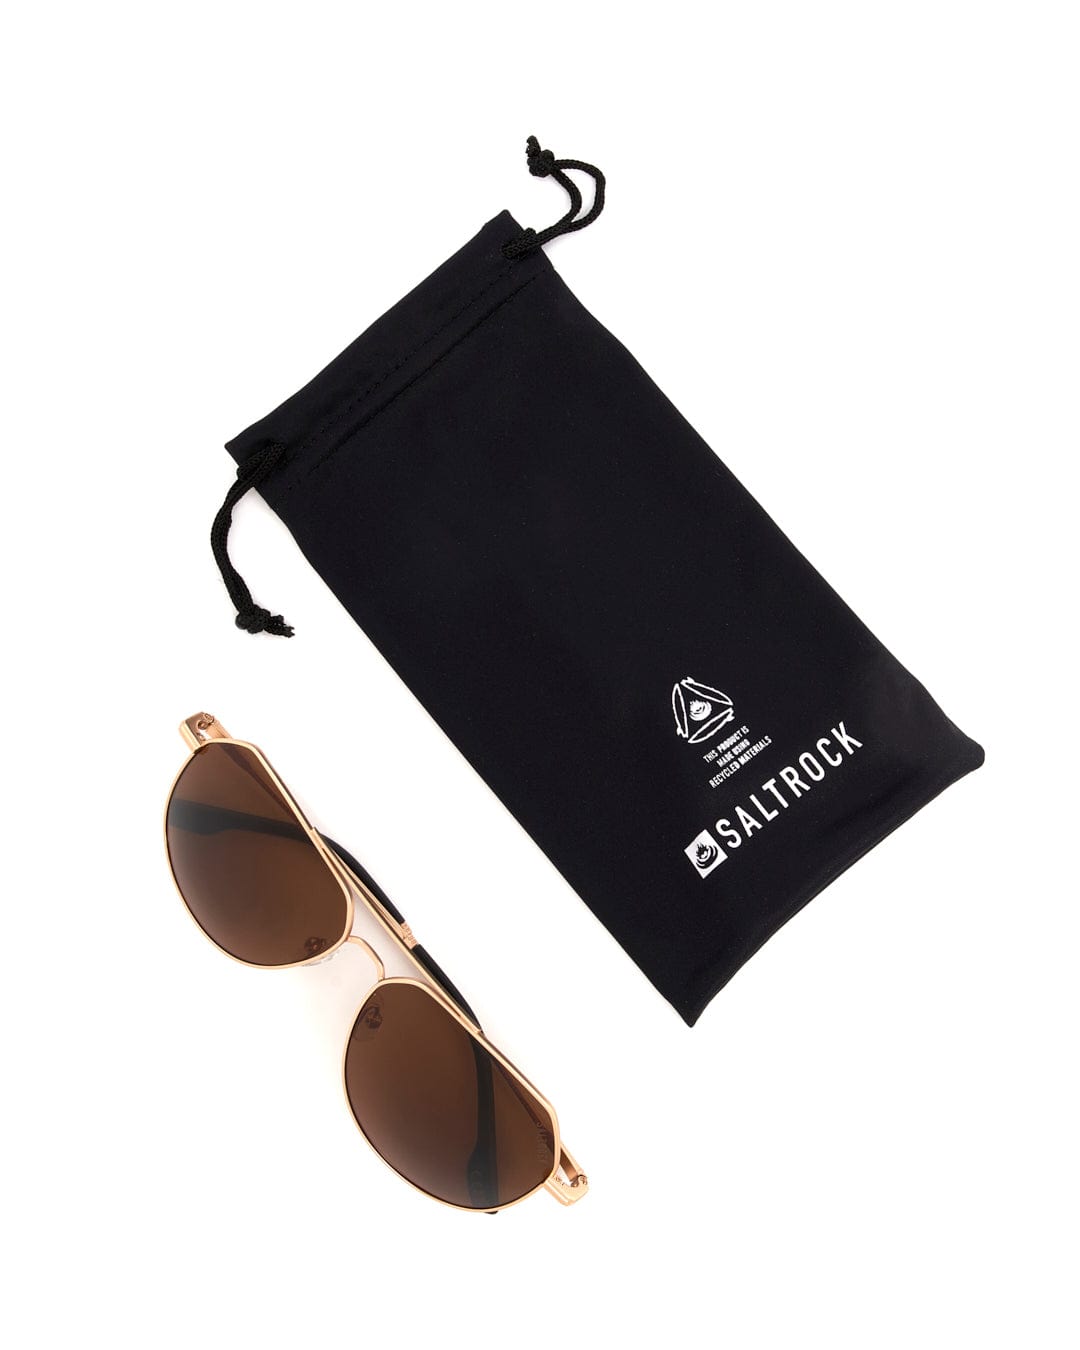 A pair of Cruiser - Aviator Polarised Sunglasses - Gold with a black pouch by Saltrock.